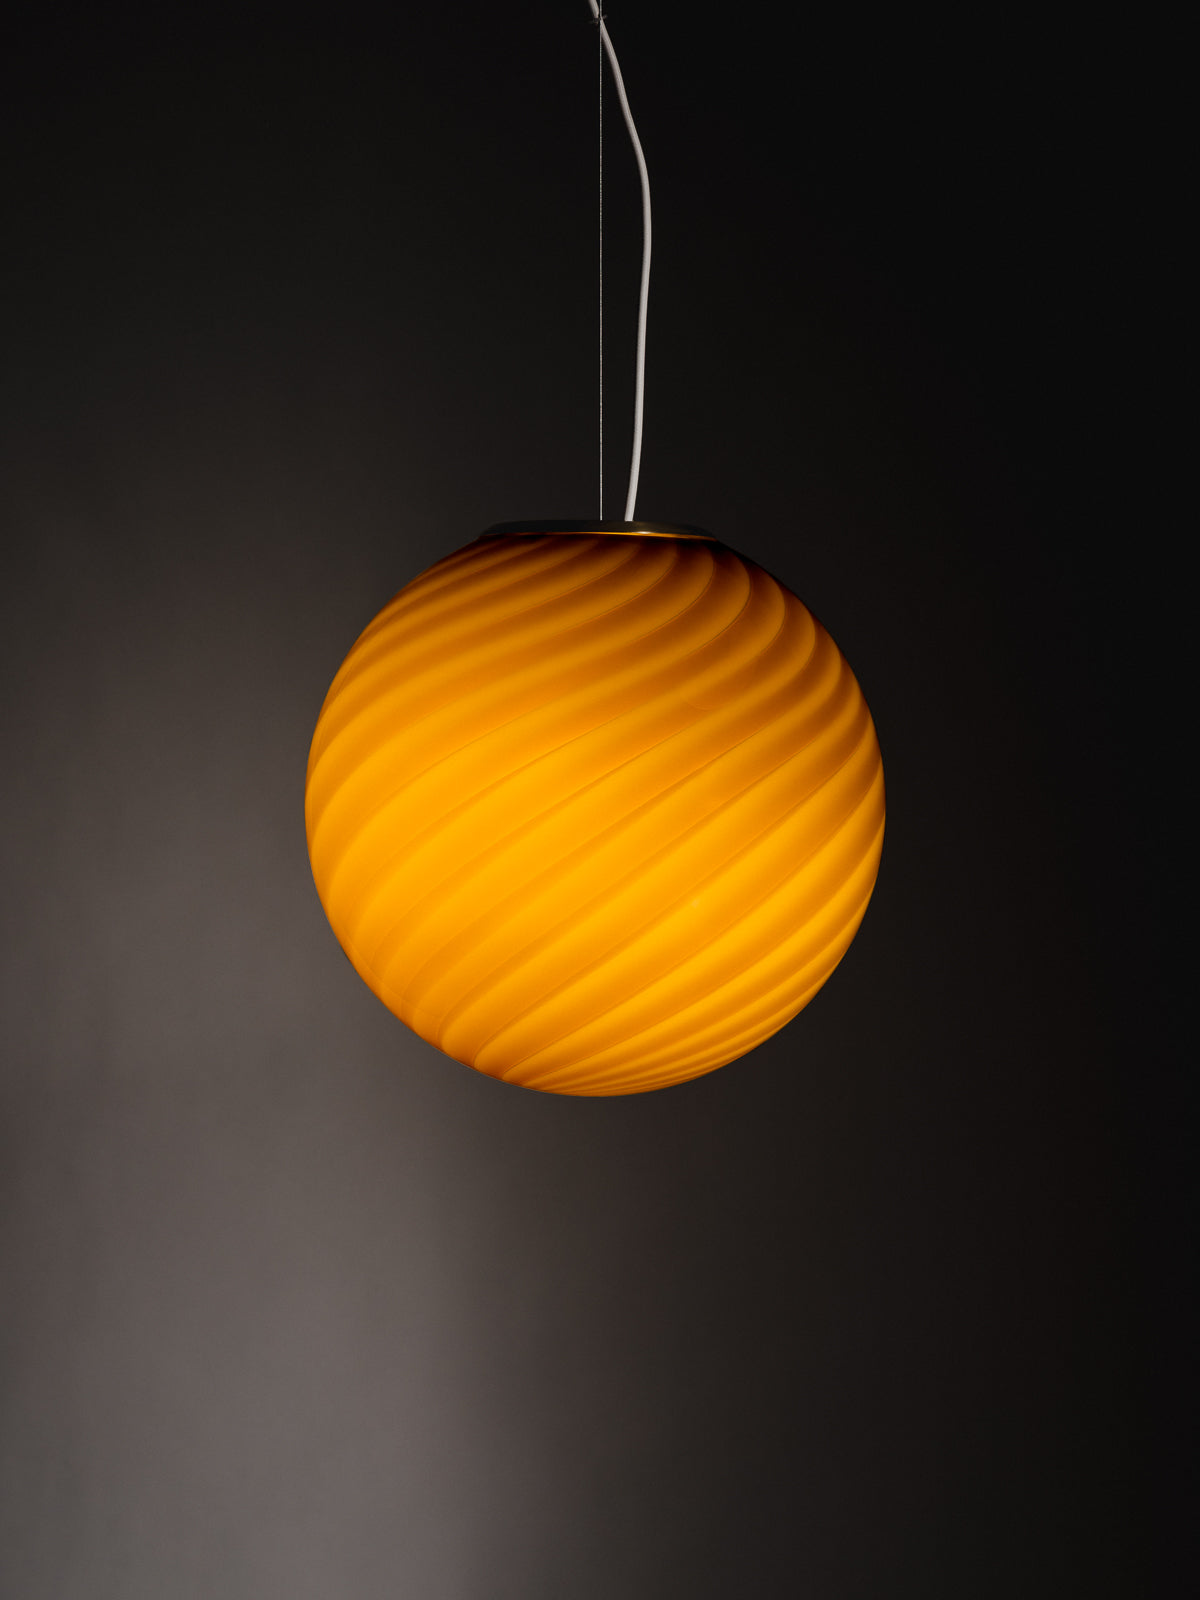 limited edition Murano Vetri glass pendant sculptural sphere-shaped pendant crafted from mouth-blown swirl opaline glass in Ambra: a bright and warm hue with golden undertones. Brass fitting hardware suspension. Murano pendel lampe I glas med swirl. Copenhagen Venice 